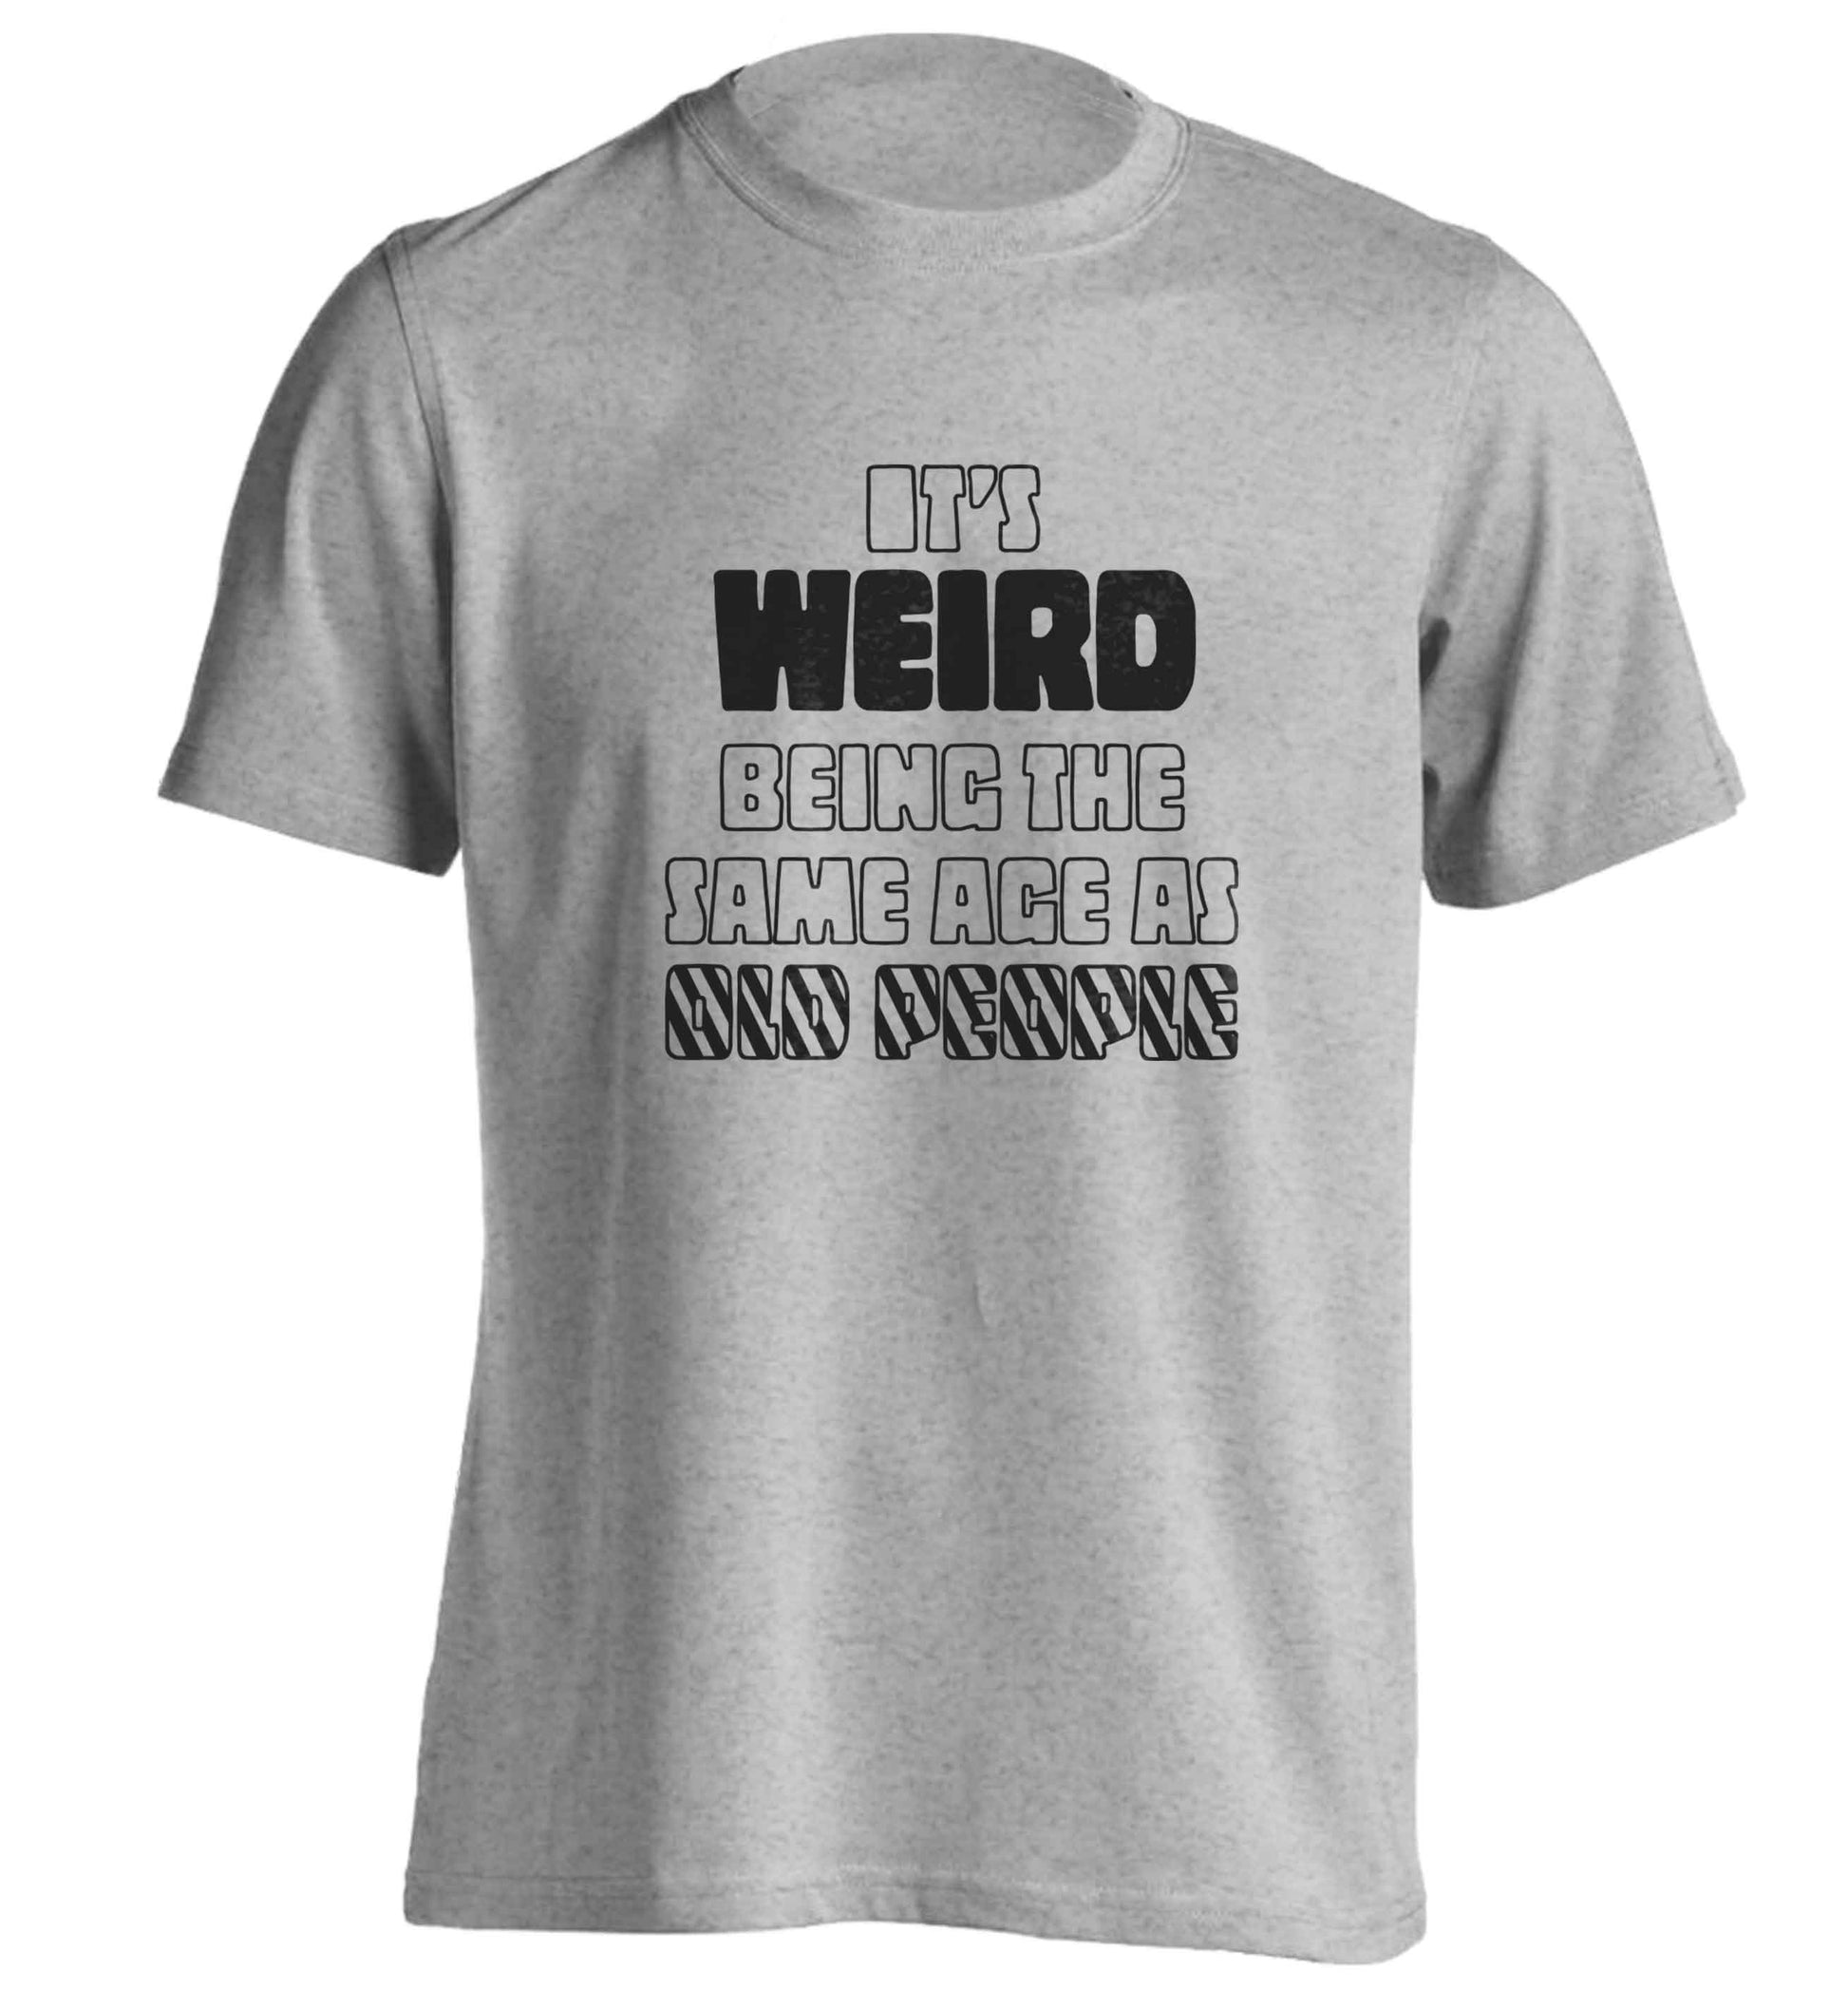 It's weird being the same age as old people adults unisex grey Tshirt 2XL